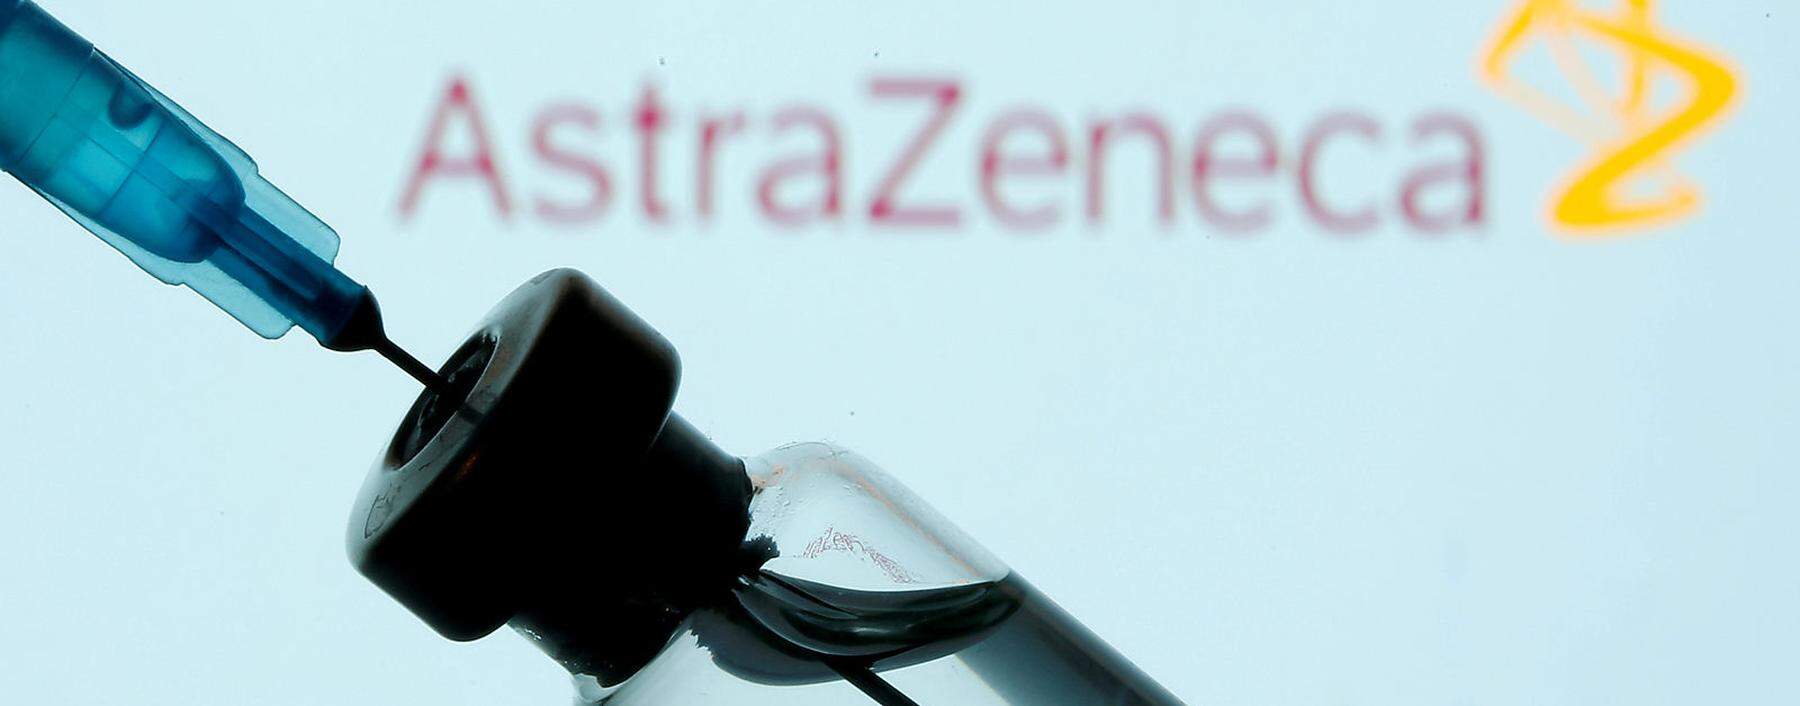 FILE PHOTO: Vial and sryinge are seen in front of displayed AstraZeneca logo